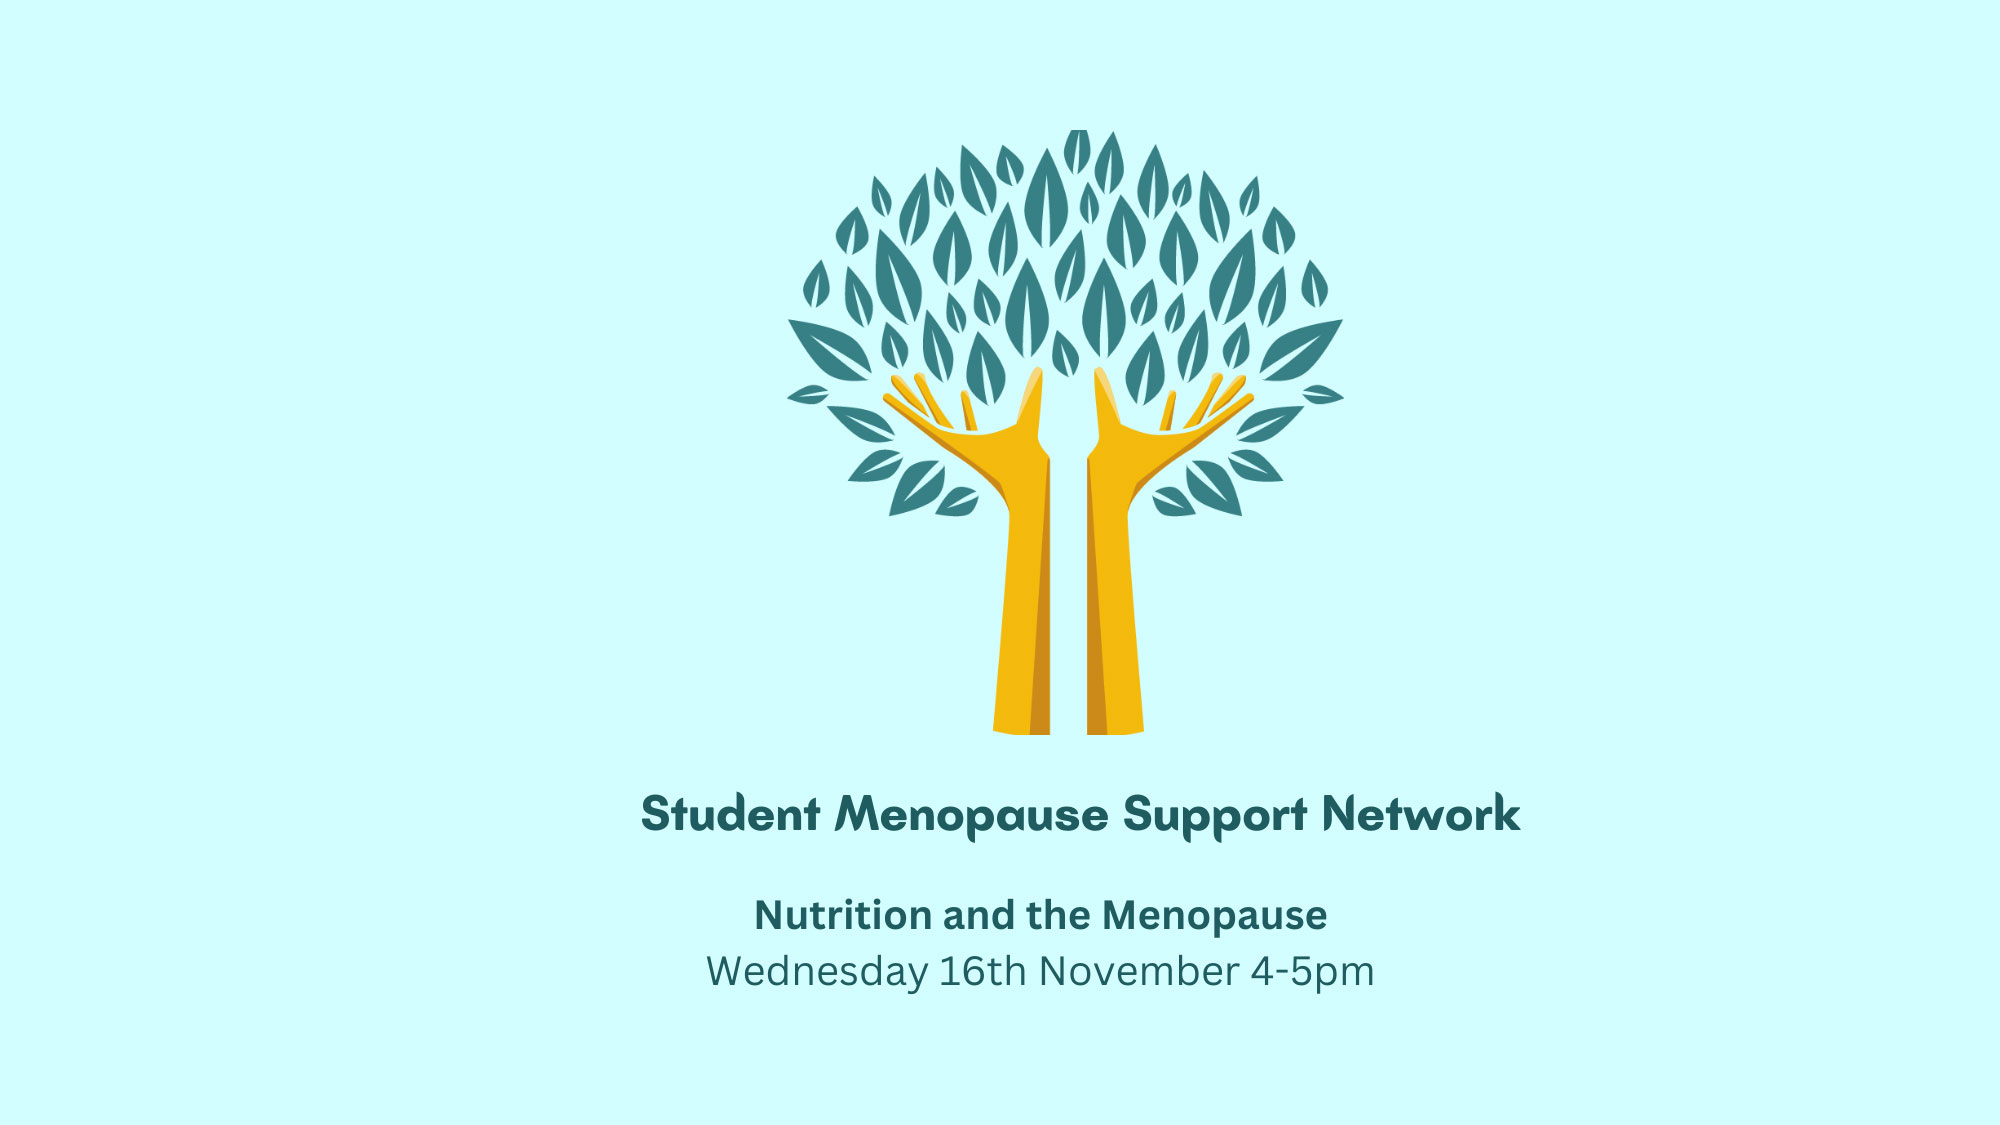 Student Menopause Support Network Relaunch – Nutrition and the Menopause with Dr Tanja Harrison